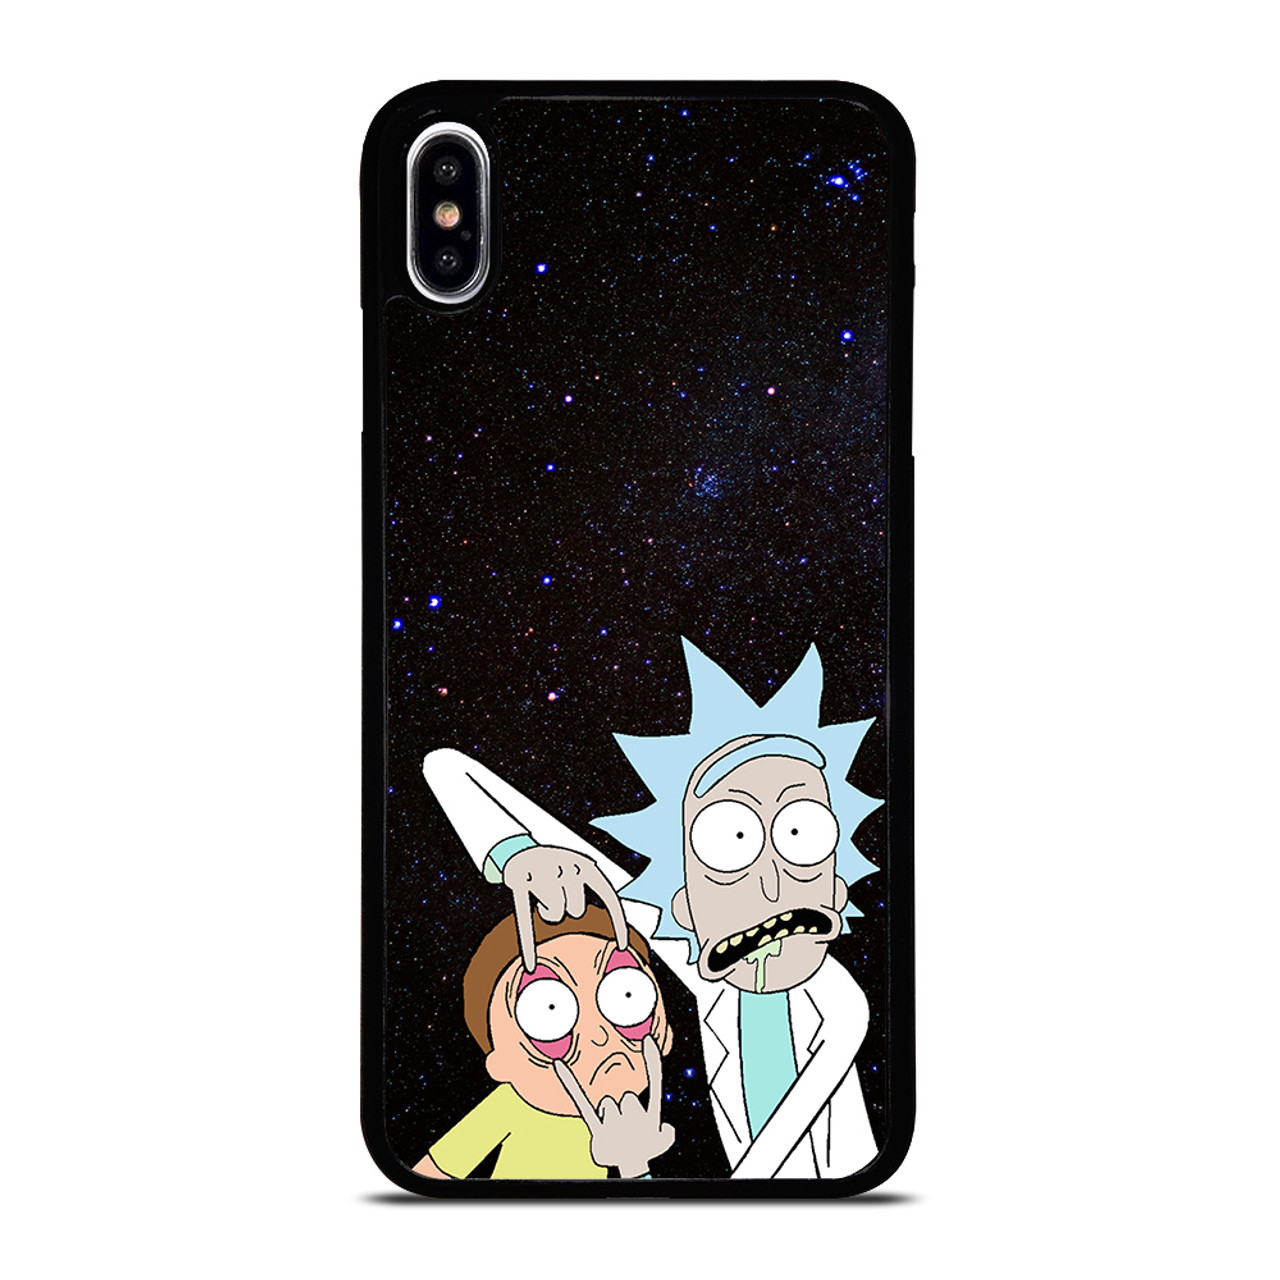 Rick And Morty Supreme iPhone 14, iPhone 14 Plus